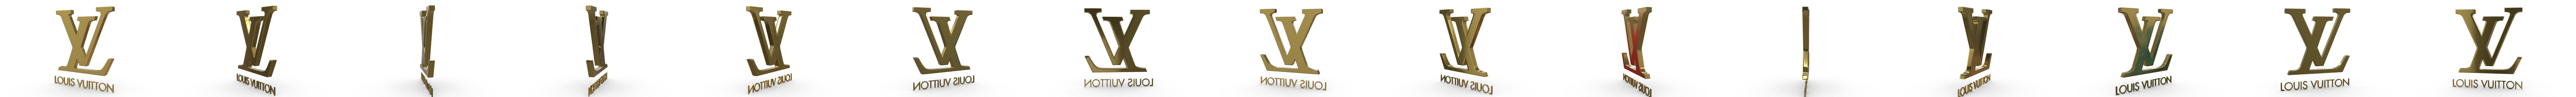 Download wallpapers Louis Vuitton logo white background Louis Vuitton 3d  logo 3d art Louis Vuitton brands logo white 3d Louis Vuitton logo for  desktop with resolution 2560x1600 High Quality HD pictures wallpapers